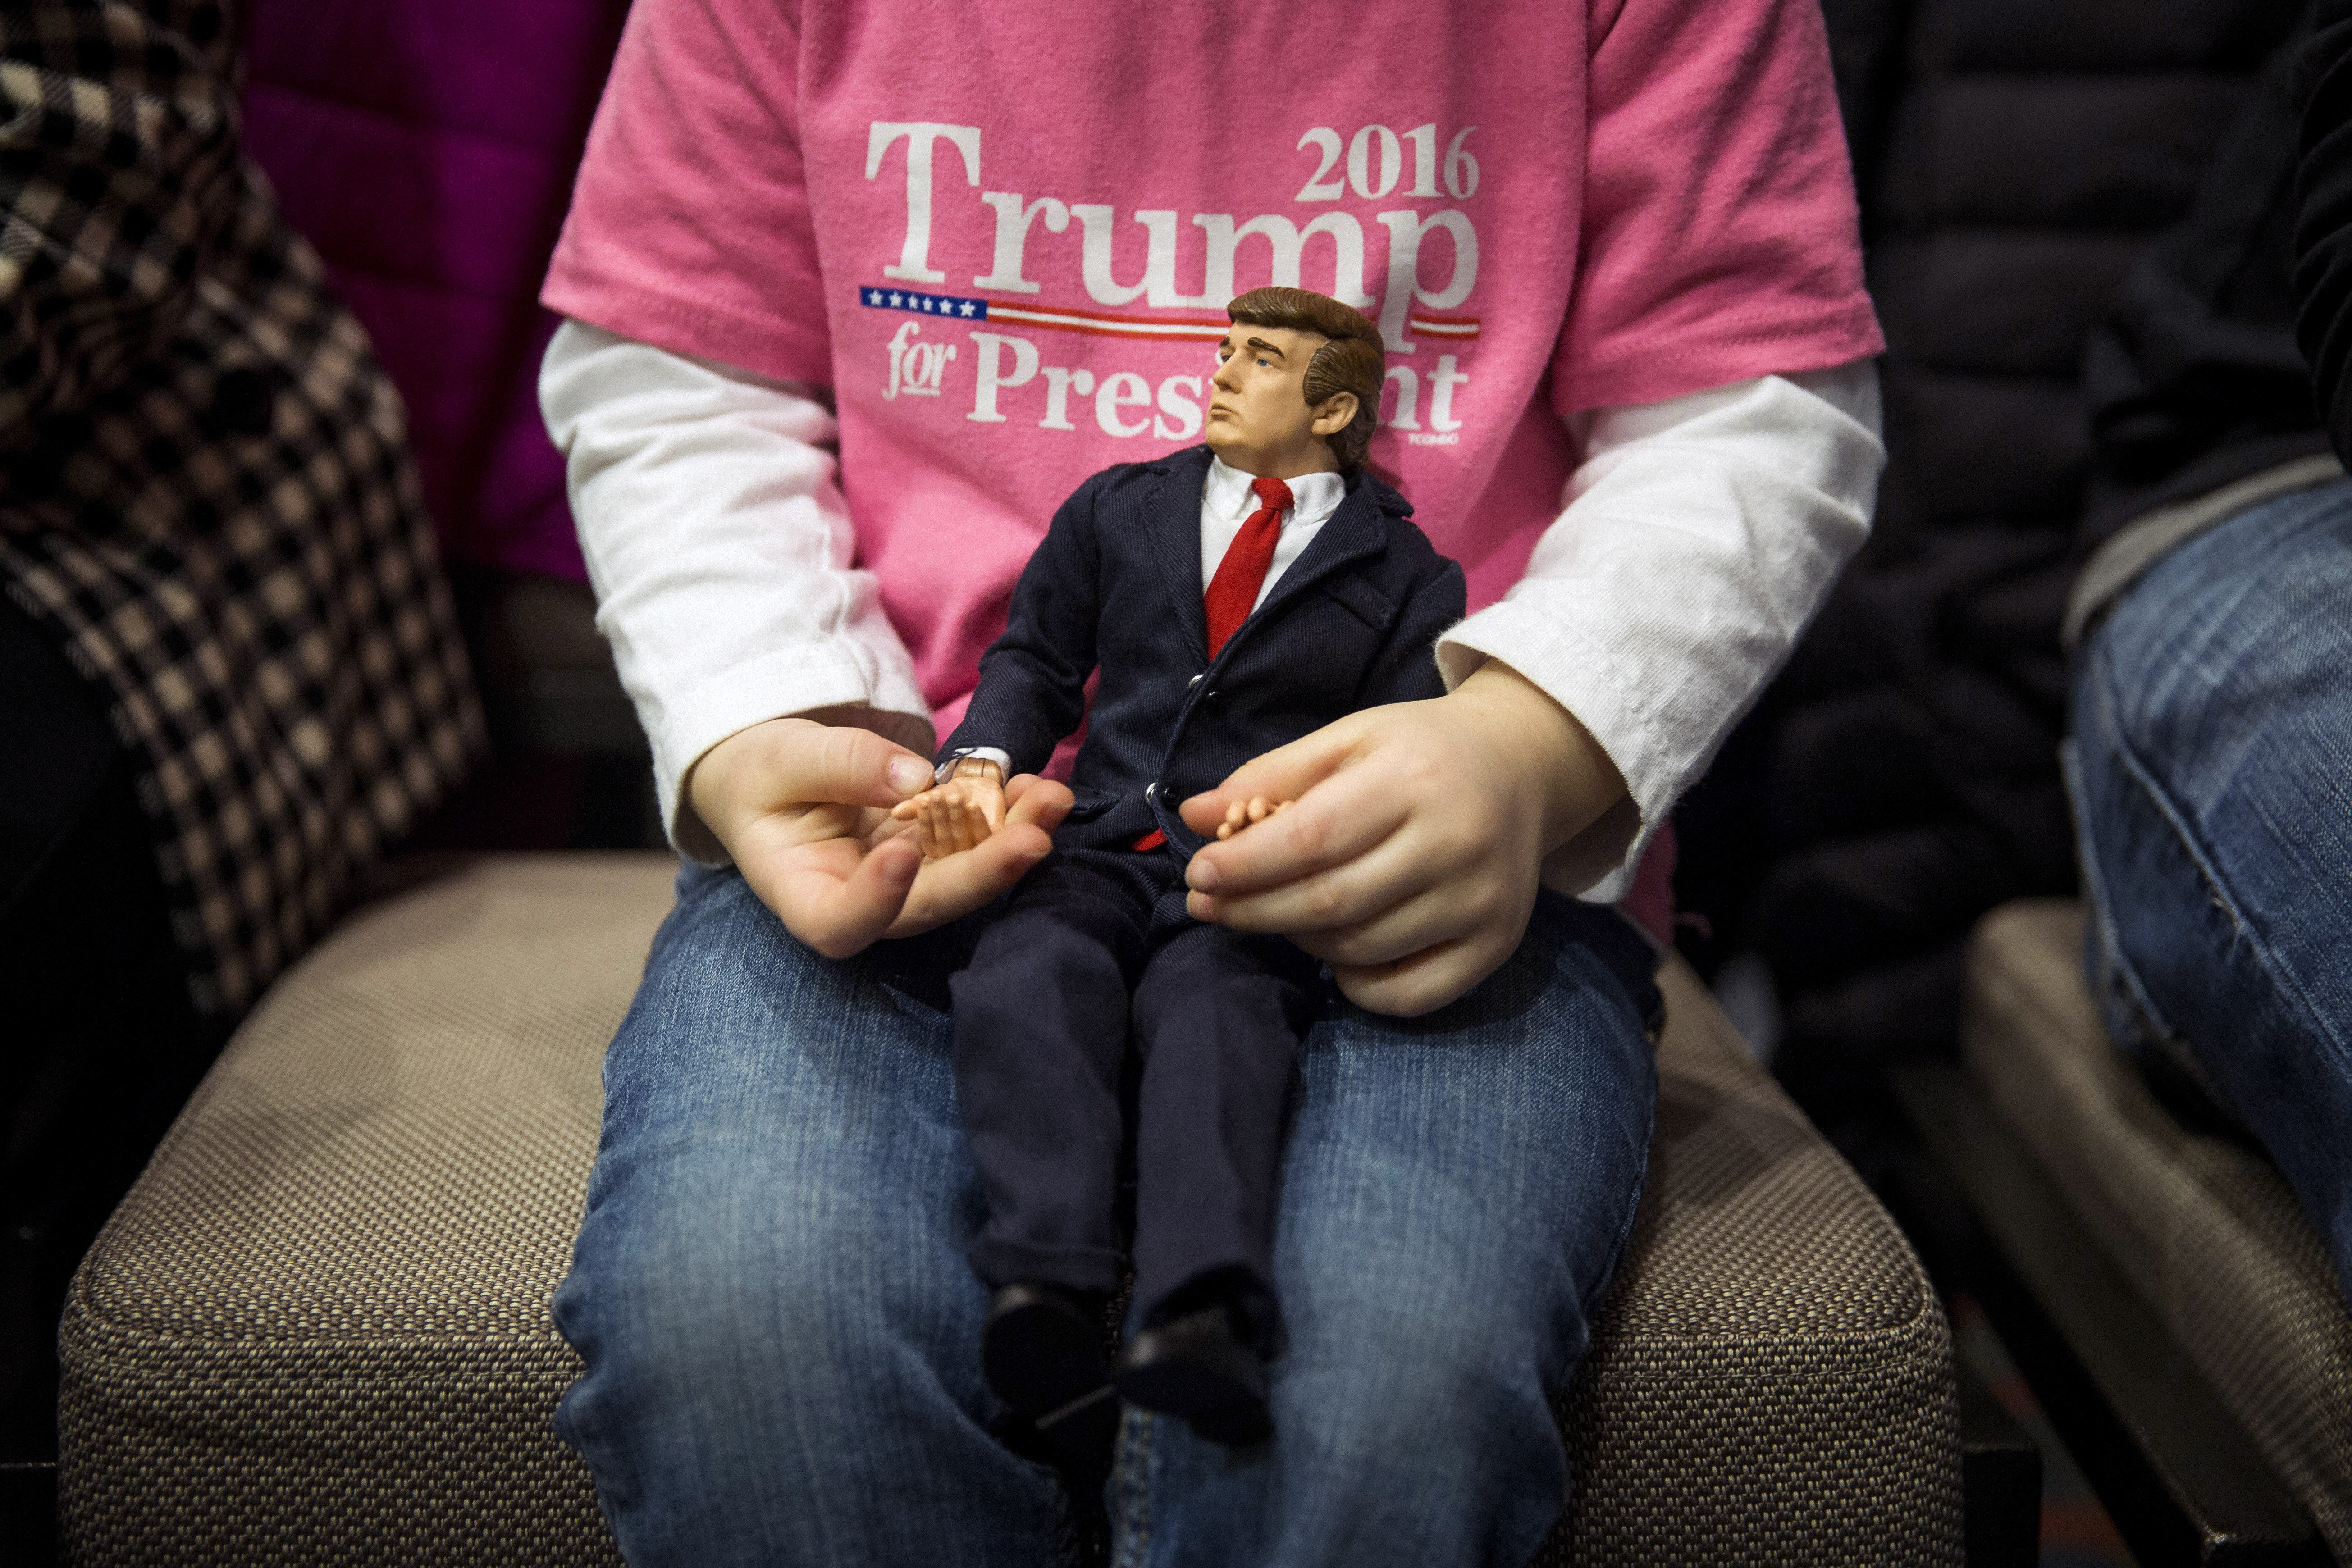 Charlee Dotson, 3, plays with a Donald Trump action figure before a campaign event for Trump in Cedar Rapids, Iowa, on Feb. 1, 2016.